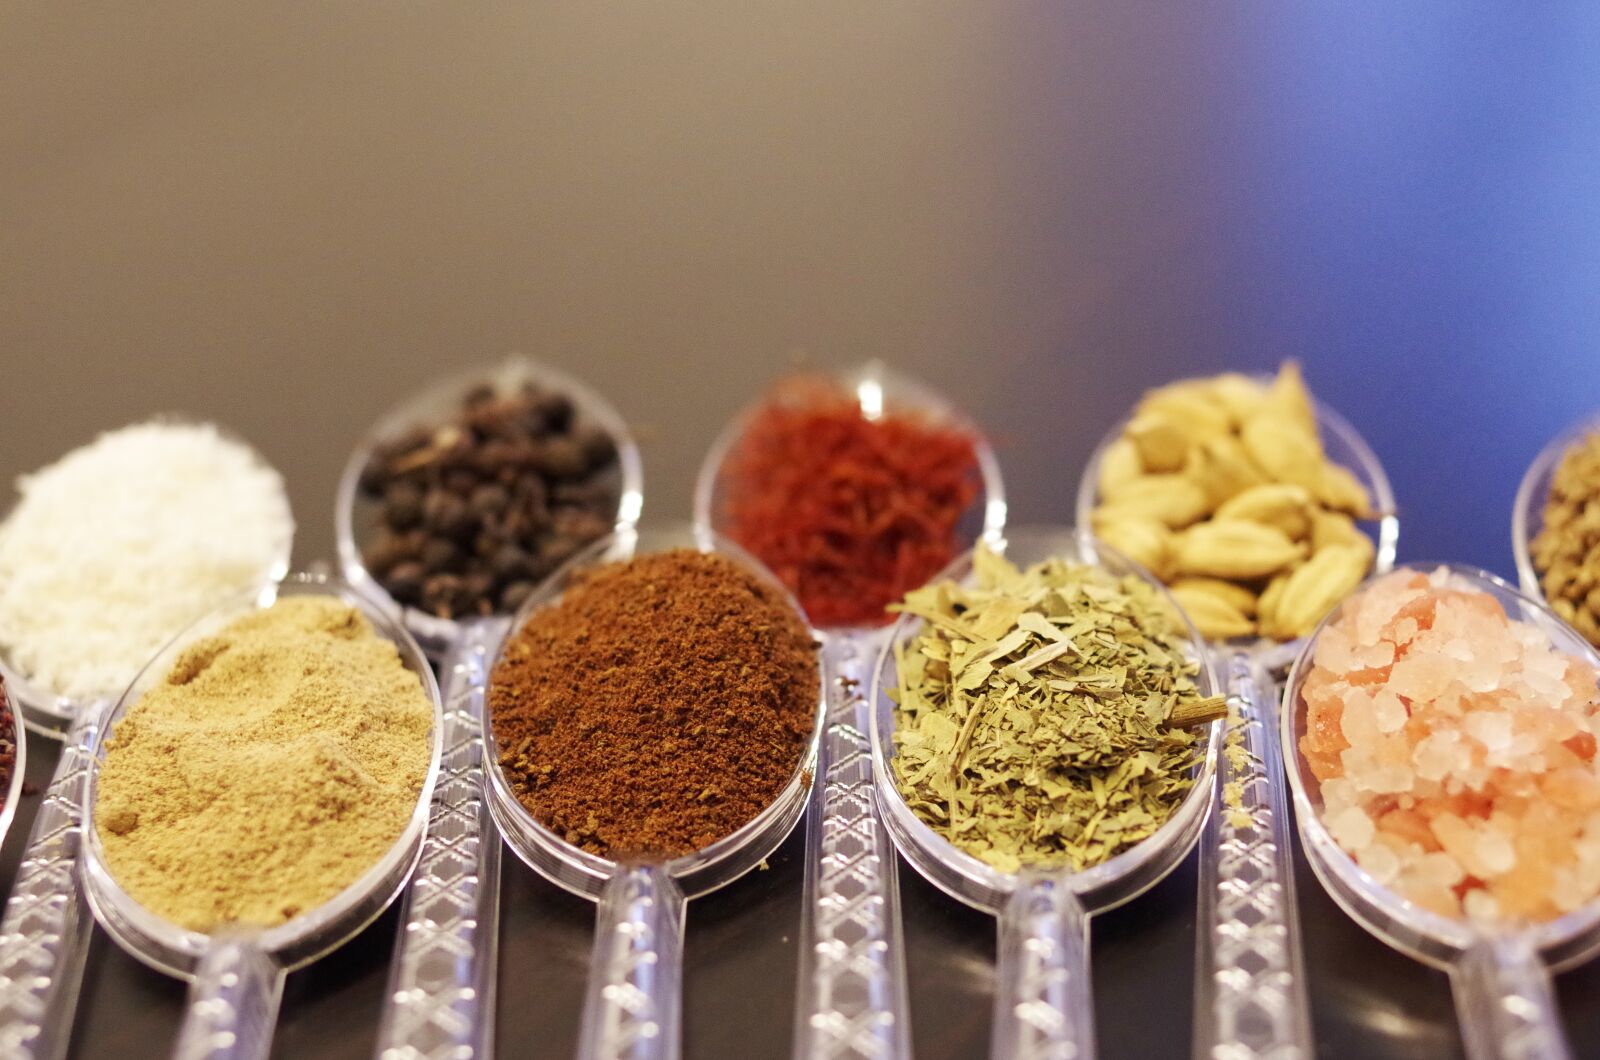 Pentax K-500 sample photo. Spices, herbs, herbs and photography